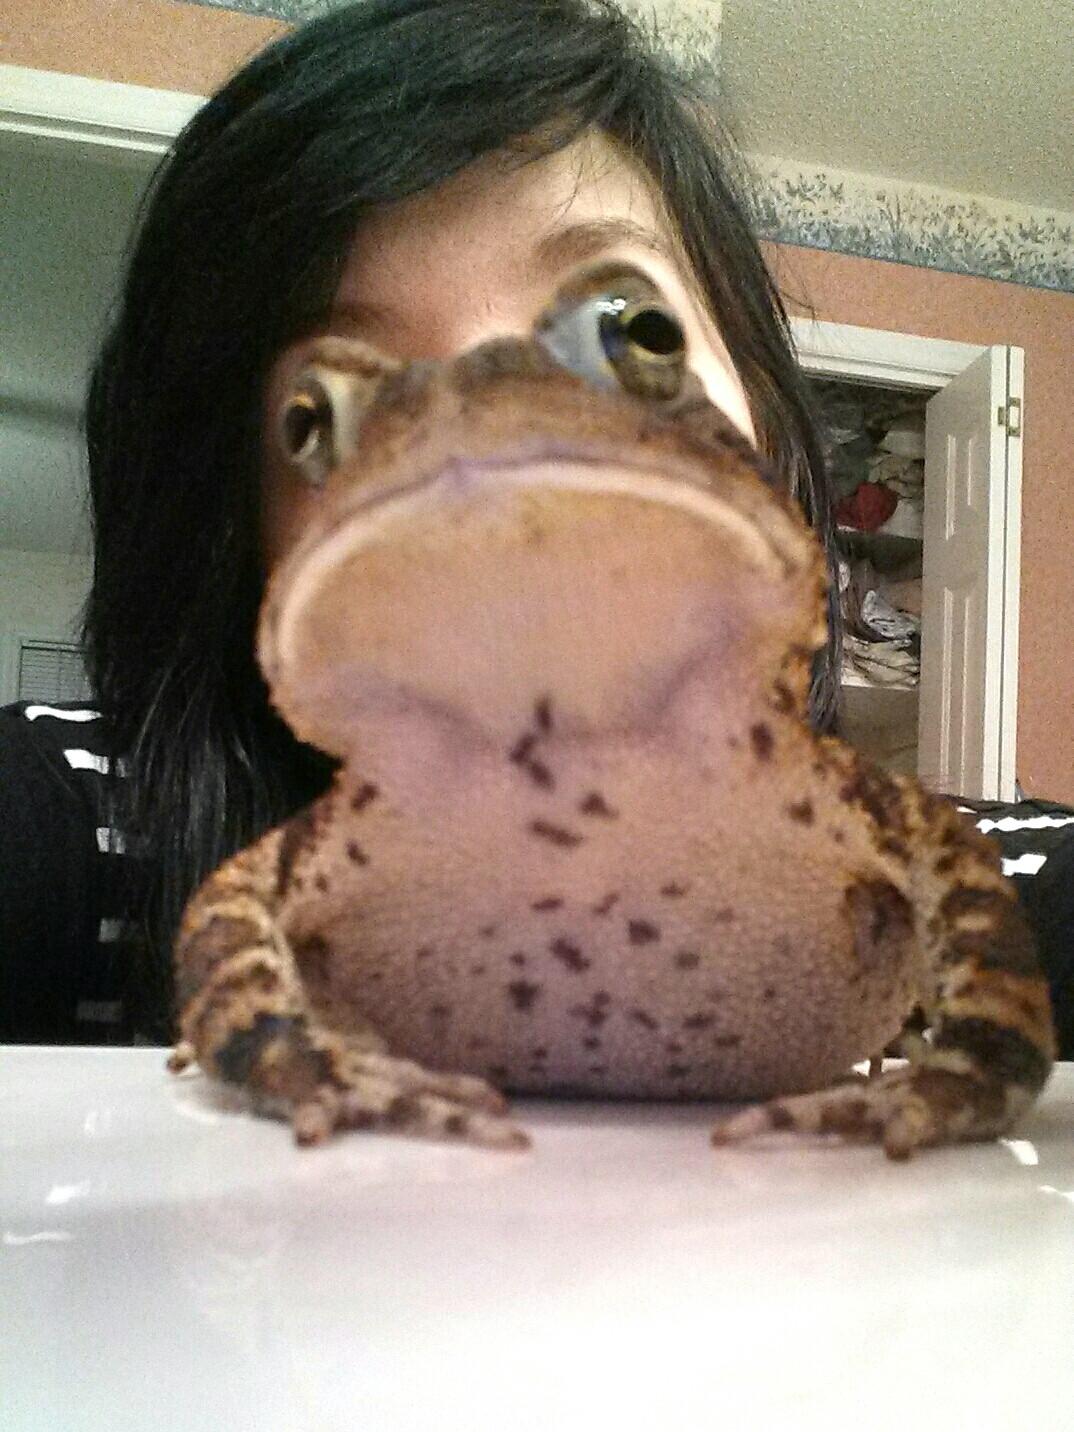 so i turned into a toad last night, perspective, wtf